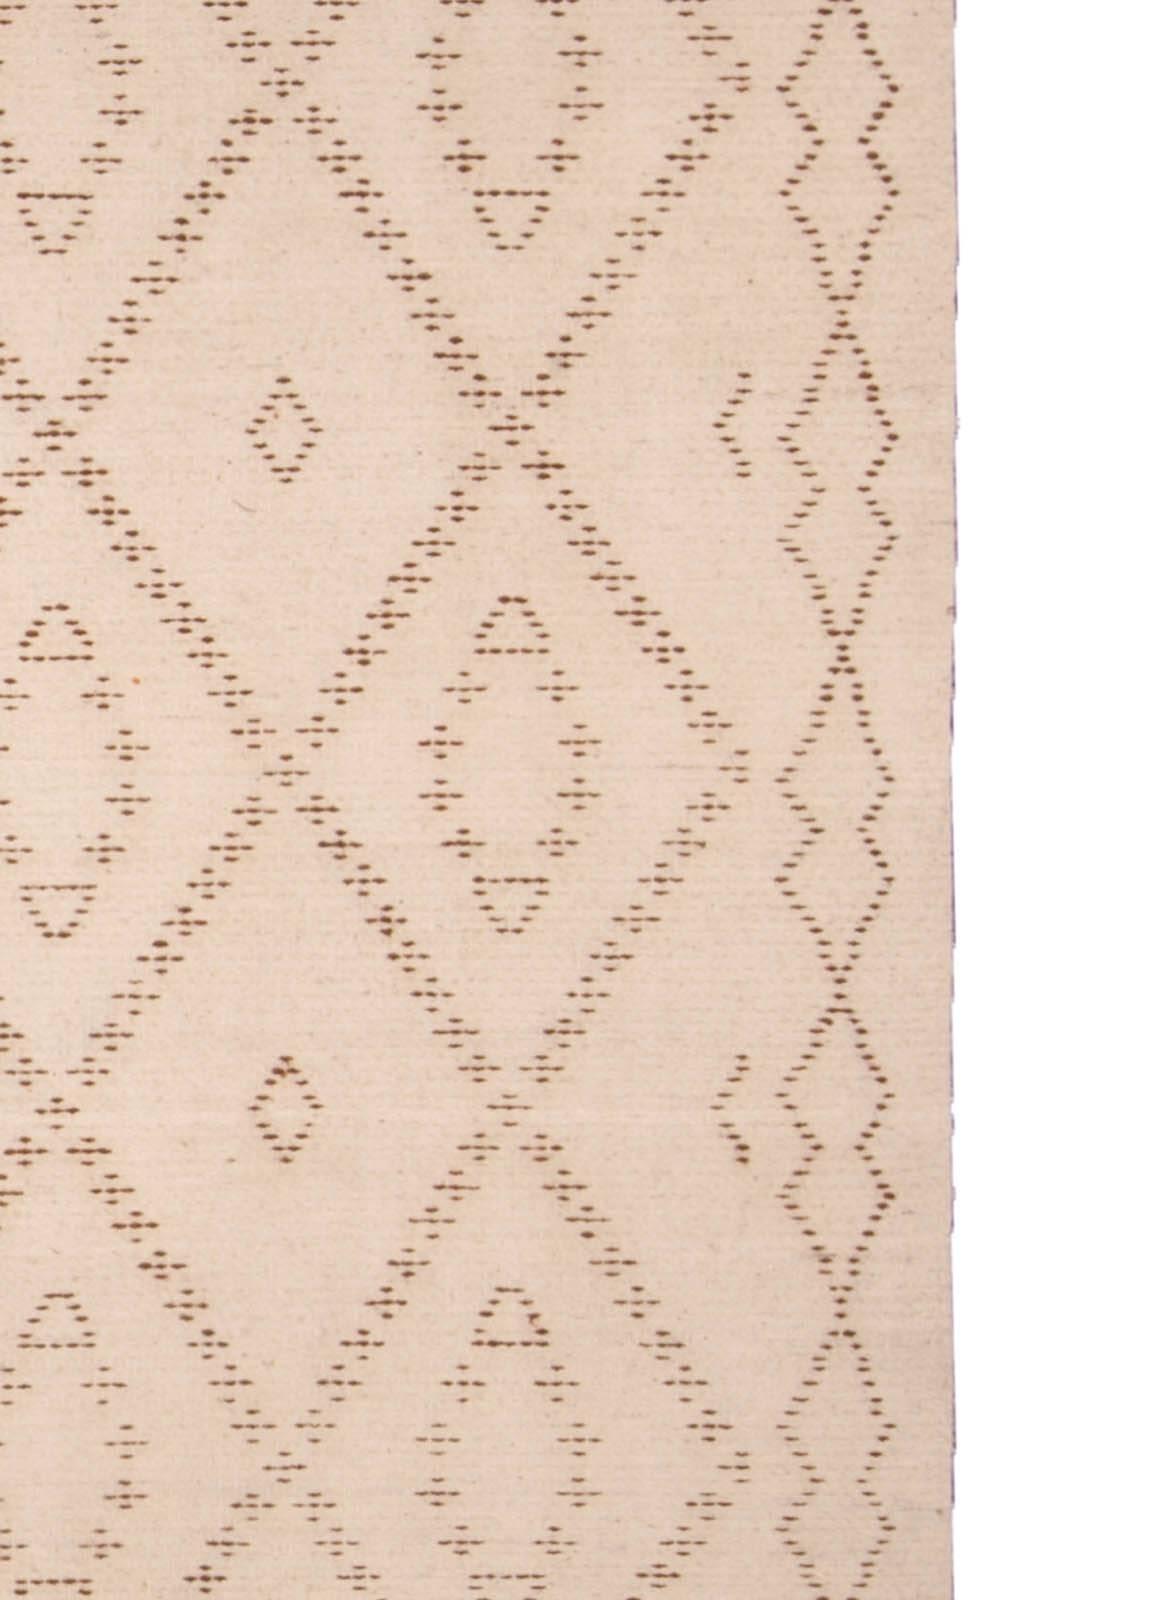 Modern Moroccan Tazo Design Beige Handmade Wool Rug by Doris Leslie Blau In New Condition For Sale In New York, NY